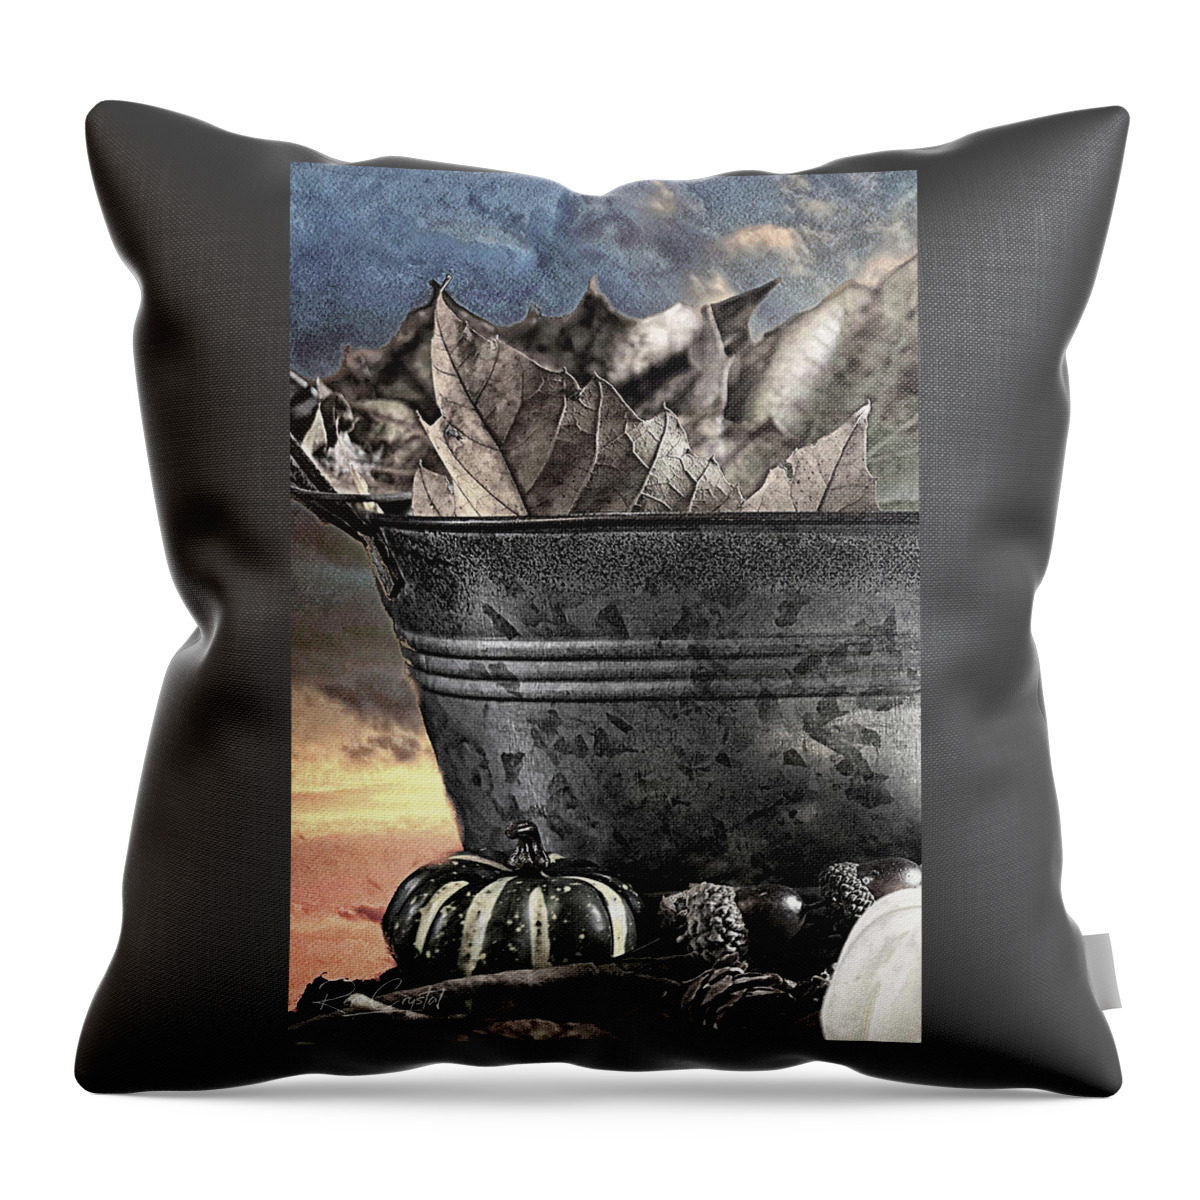 Leaves Throw Pillow featuring the photograph Against An Autumn Sky by Rene Crystal